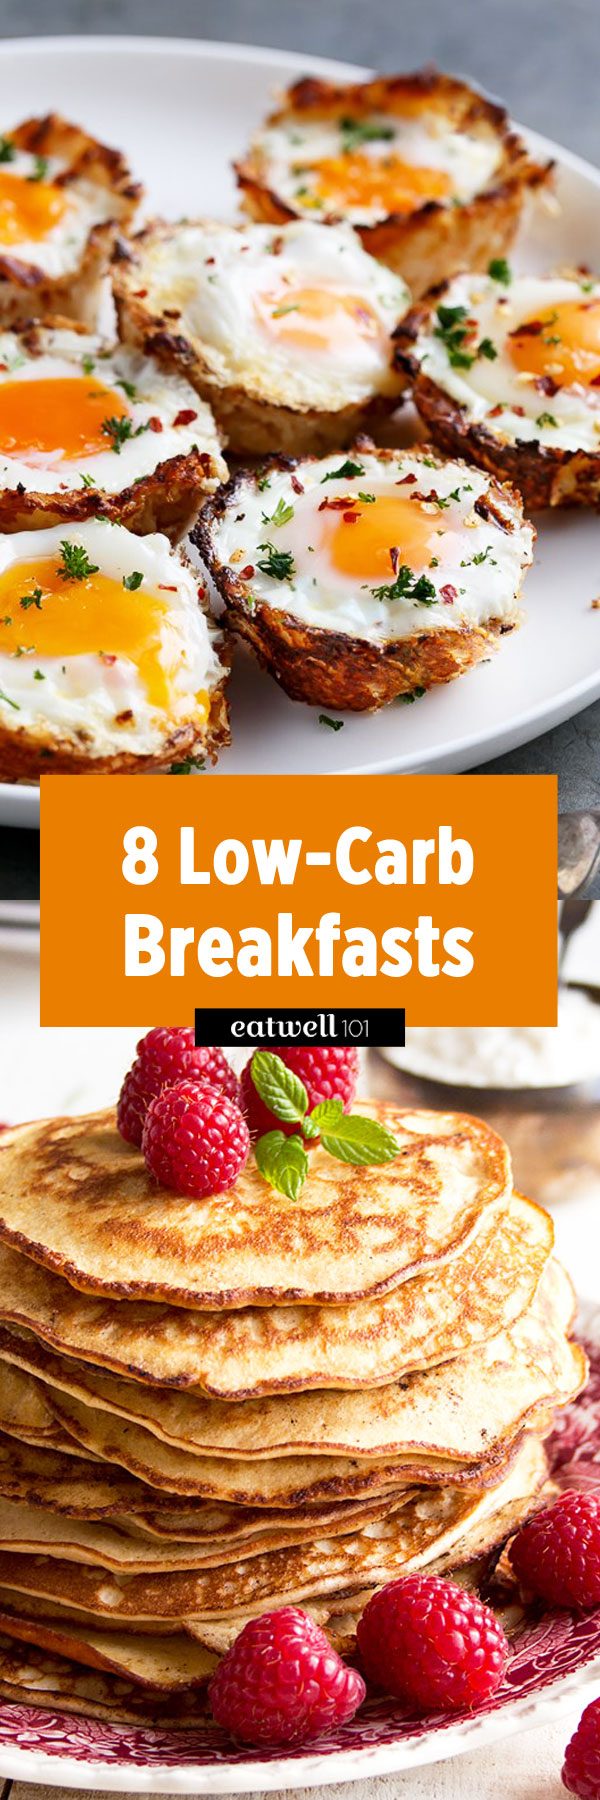 Low-Carb Breakfast Recipes: 8 Yummy Options — Eatwell101